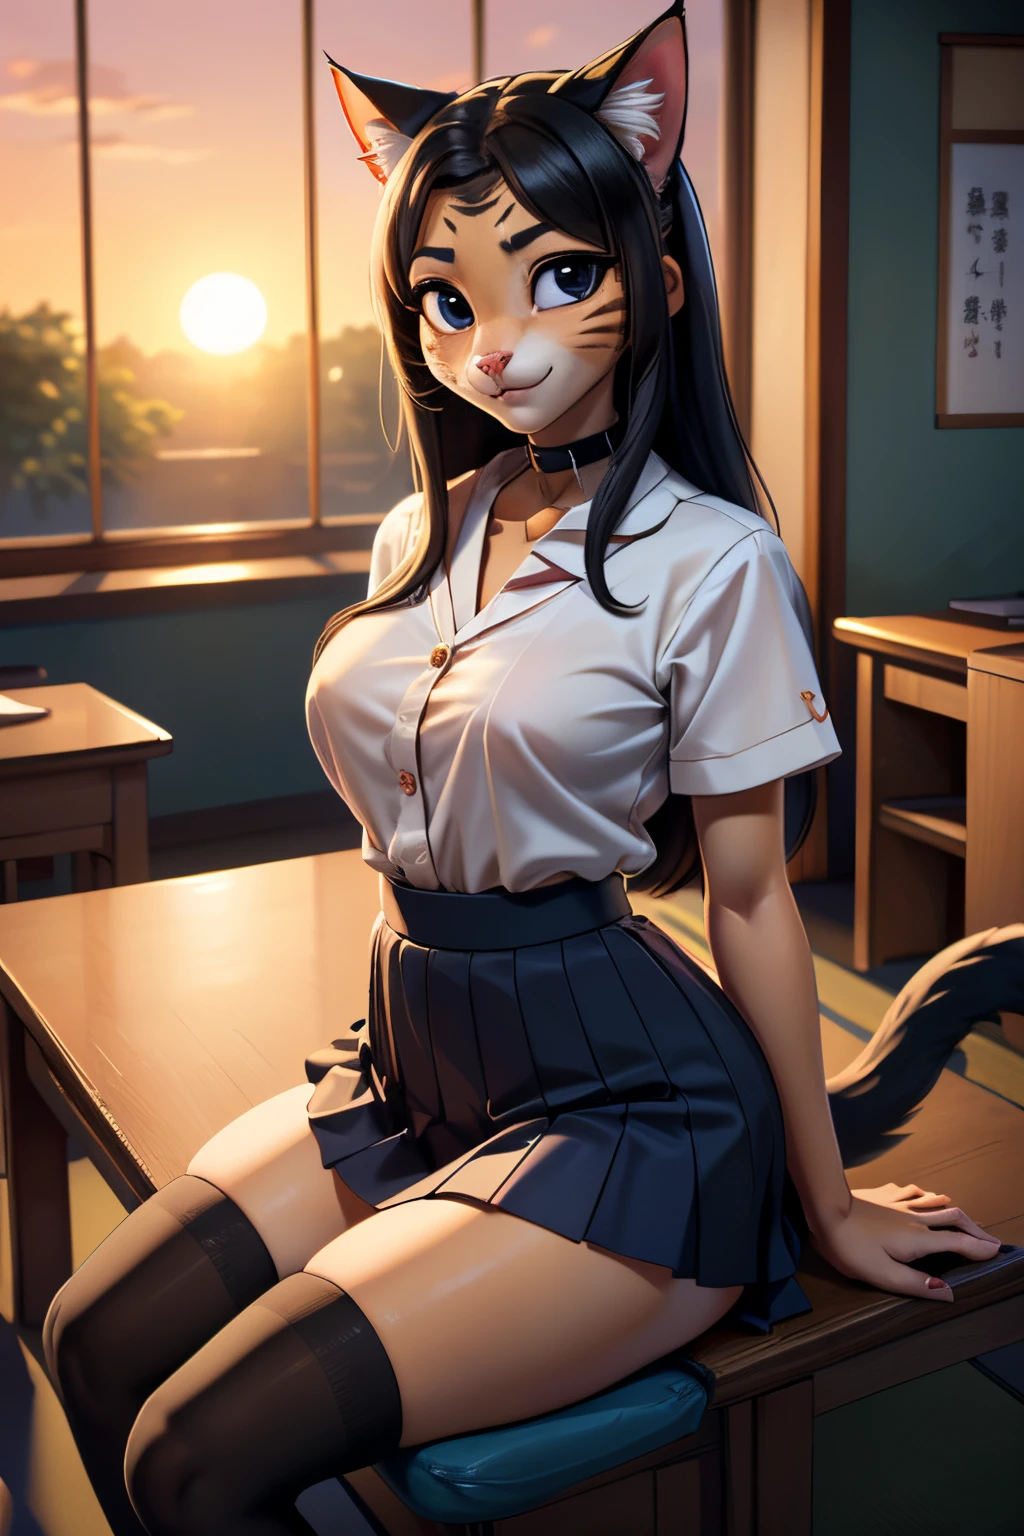 ((ultra quality)), ((tmasterpiece)), Girl-khajiit, Japanese school girl, anthro cat, furry, ((Black long hair)), ((there are only cat ears)), ((There is a cat's long tail in the back)), Beautiful cute face, beautiful female lips, charming beauty, ((Kind expression on his face)), looks at the camera with his eyes slightly closed, ((Skin color: white)), ((there is cat hair on the body)), Body glare, ((detailed beautiful female eyes)), ((kblack eyes)), beautiful female hands, ((perfect female figure)), ideal female body shapes, Beautiful waist, big thighs, Beautiful butt, ((Subtle and beautiful)), standing seductively by the window ((bottom perspective close up)), ((Dressed in Japanese , dark blue skirt, dark blue knee socks, brown shoes, black choker around the neck), background: The Japanese School, Japanese School Class, beautiful sunset outside, ((Depth of field)), ((high quality clear image)), ((crisp details)), ((higly detailed)), Realistic, Professional Photo Session, ((Clear Focus)), ((cartoon)), the anime, NSFW